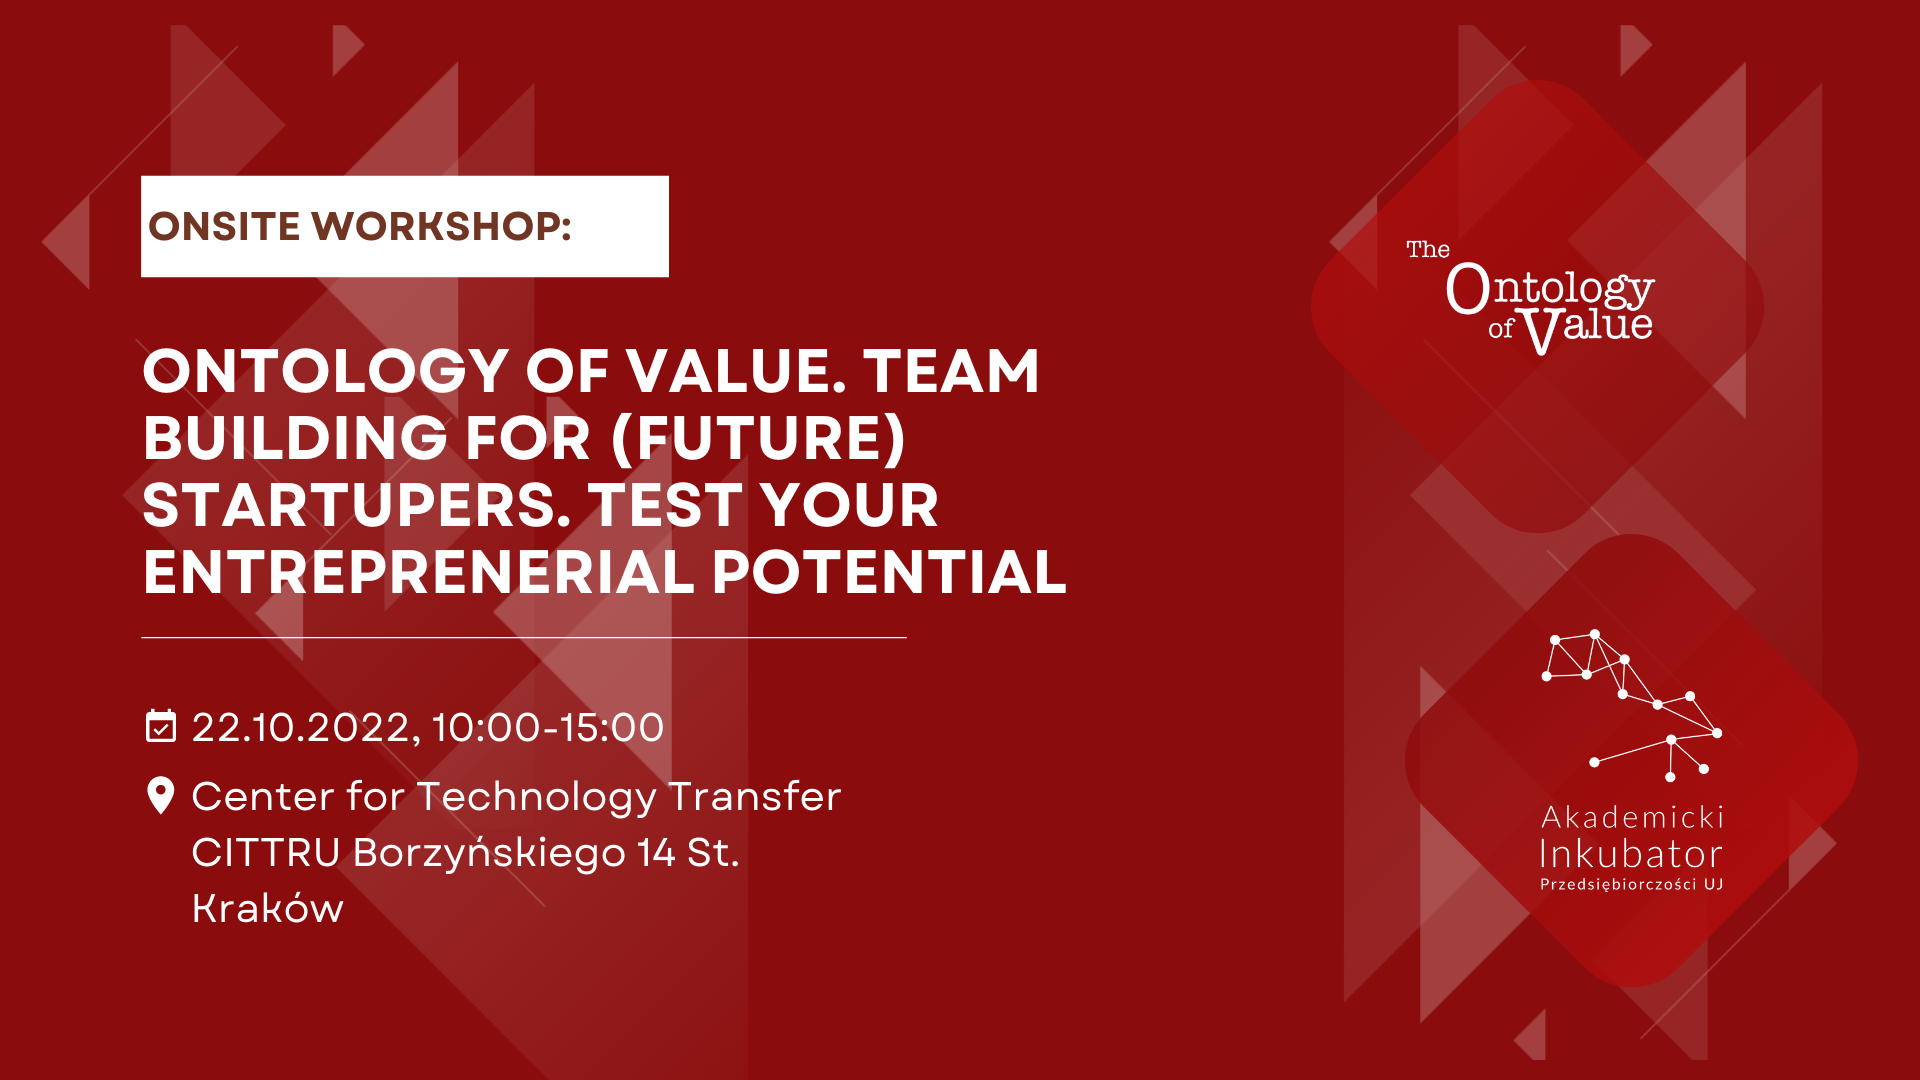 Onsite workshop: Team building for (future) startupers. Test your entreprenerial potential